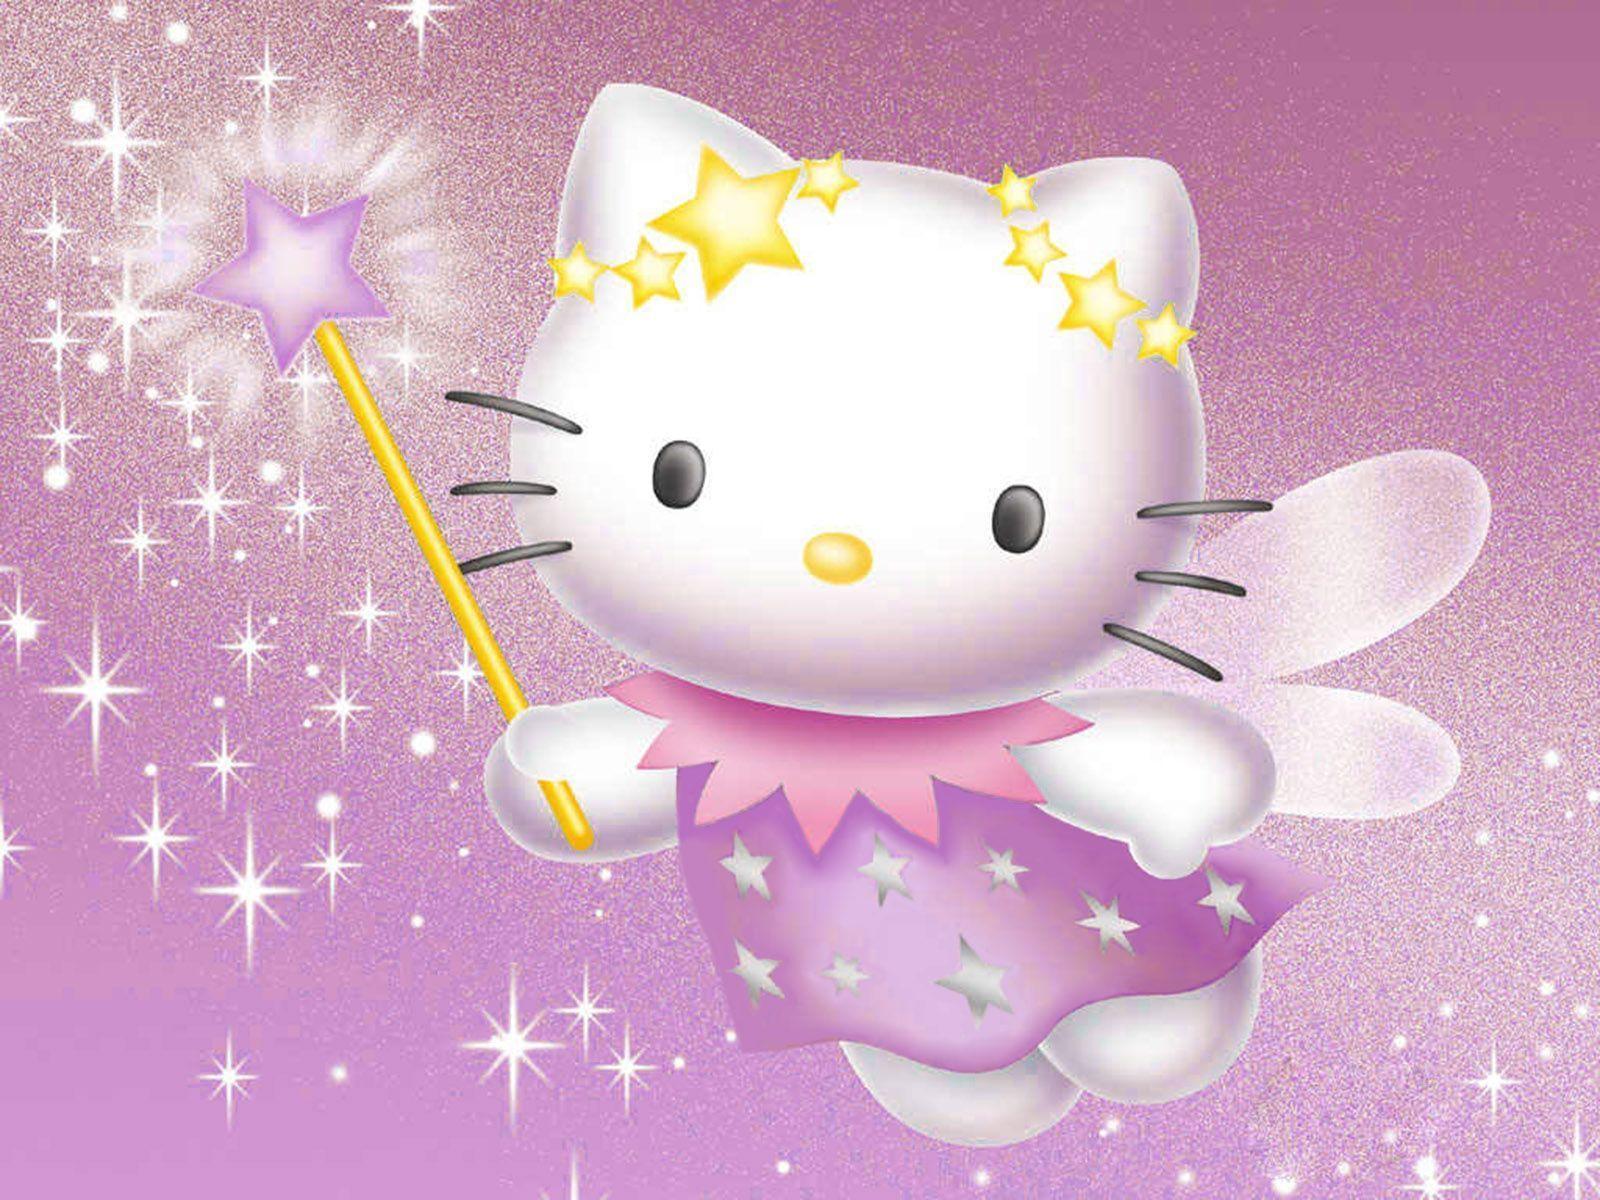 Download Cartoons Hello Kitty Free High Quality Picture Wallpaper